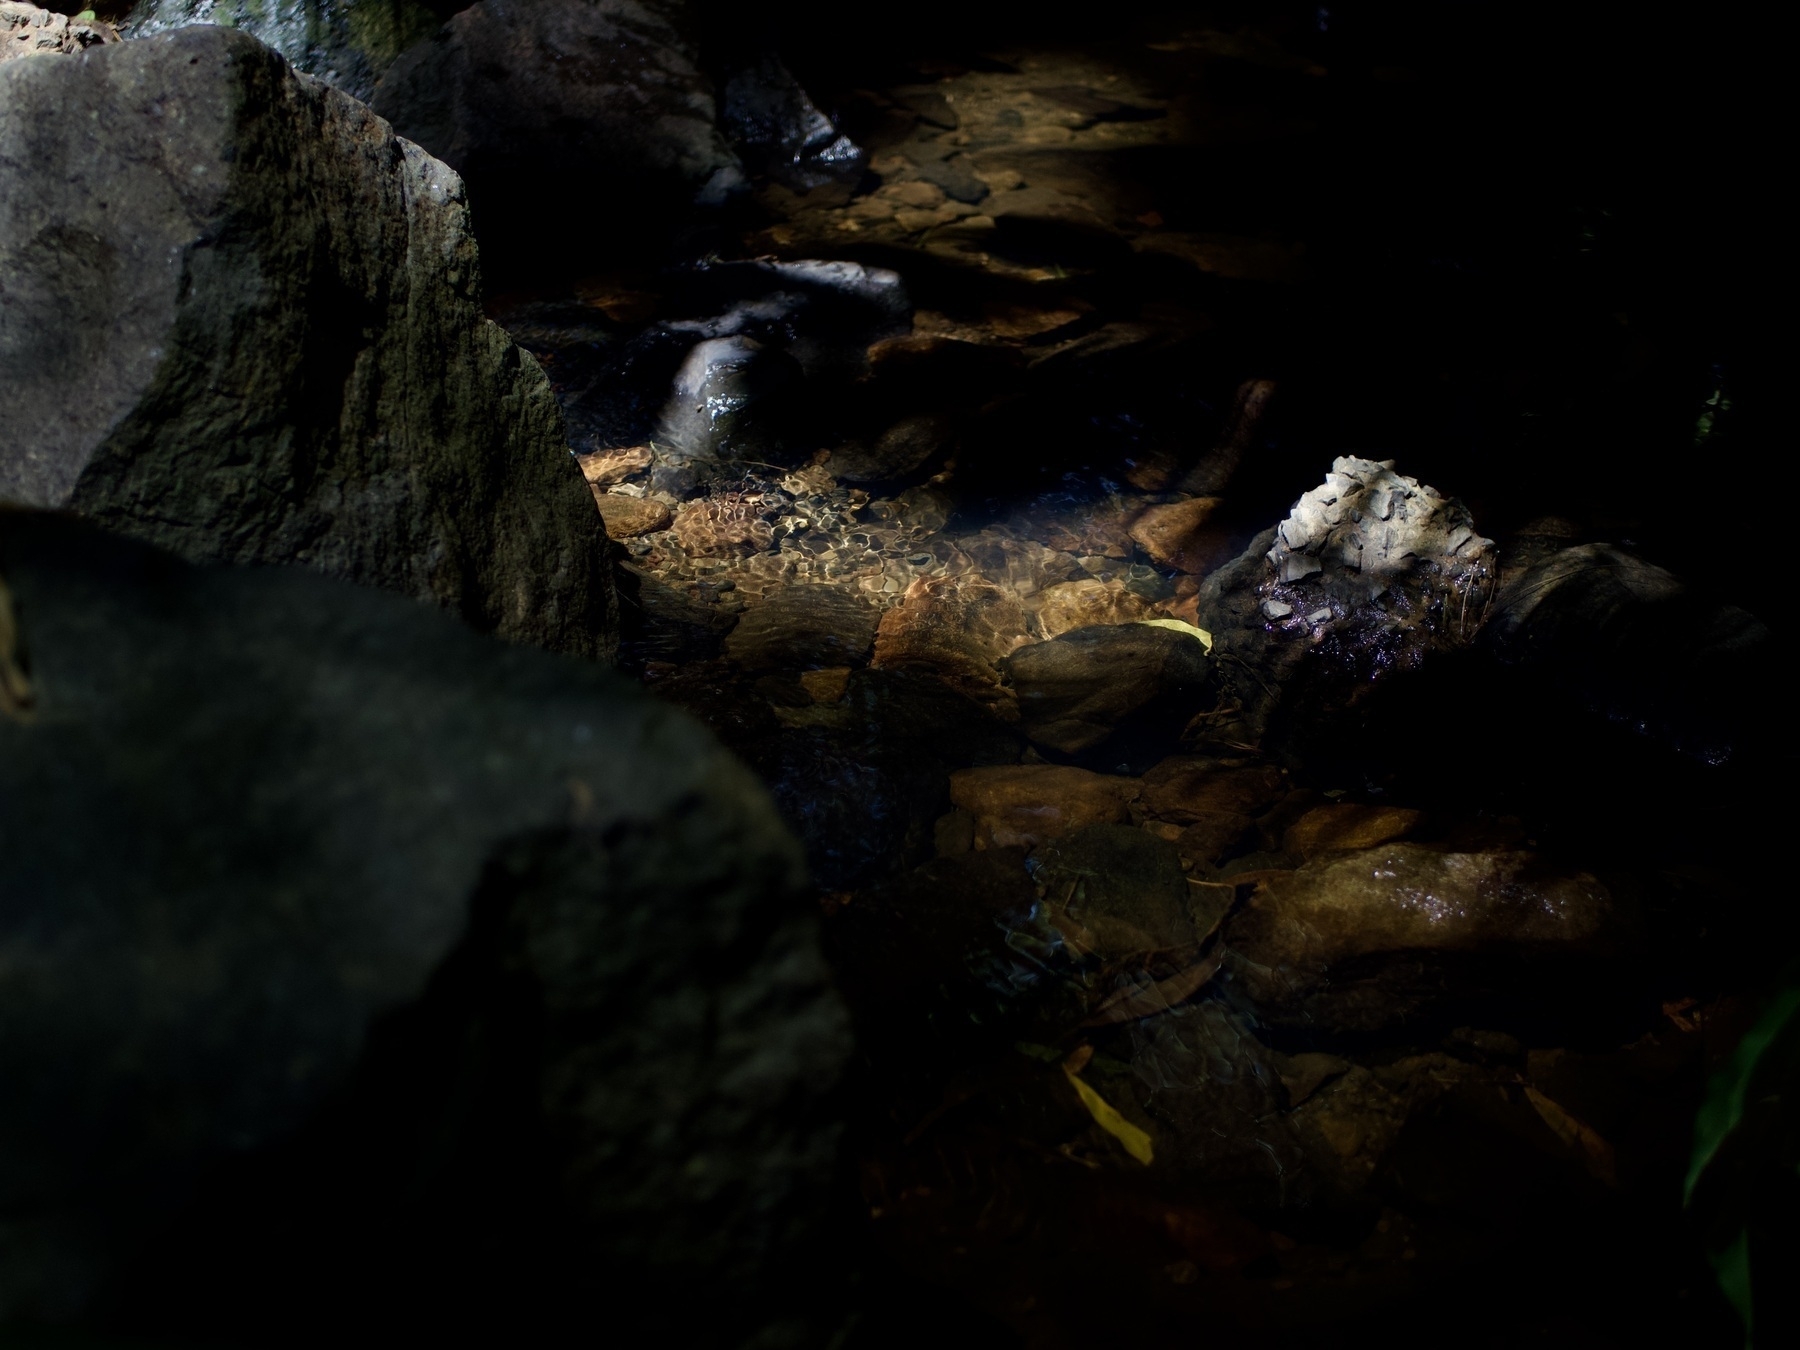 A shadowy view of a rocky creek